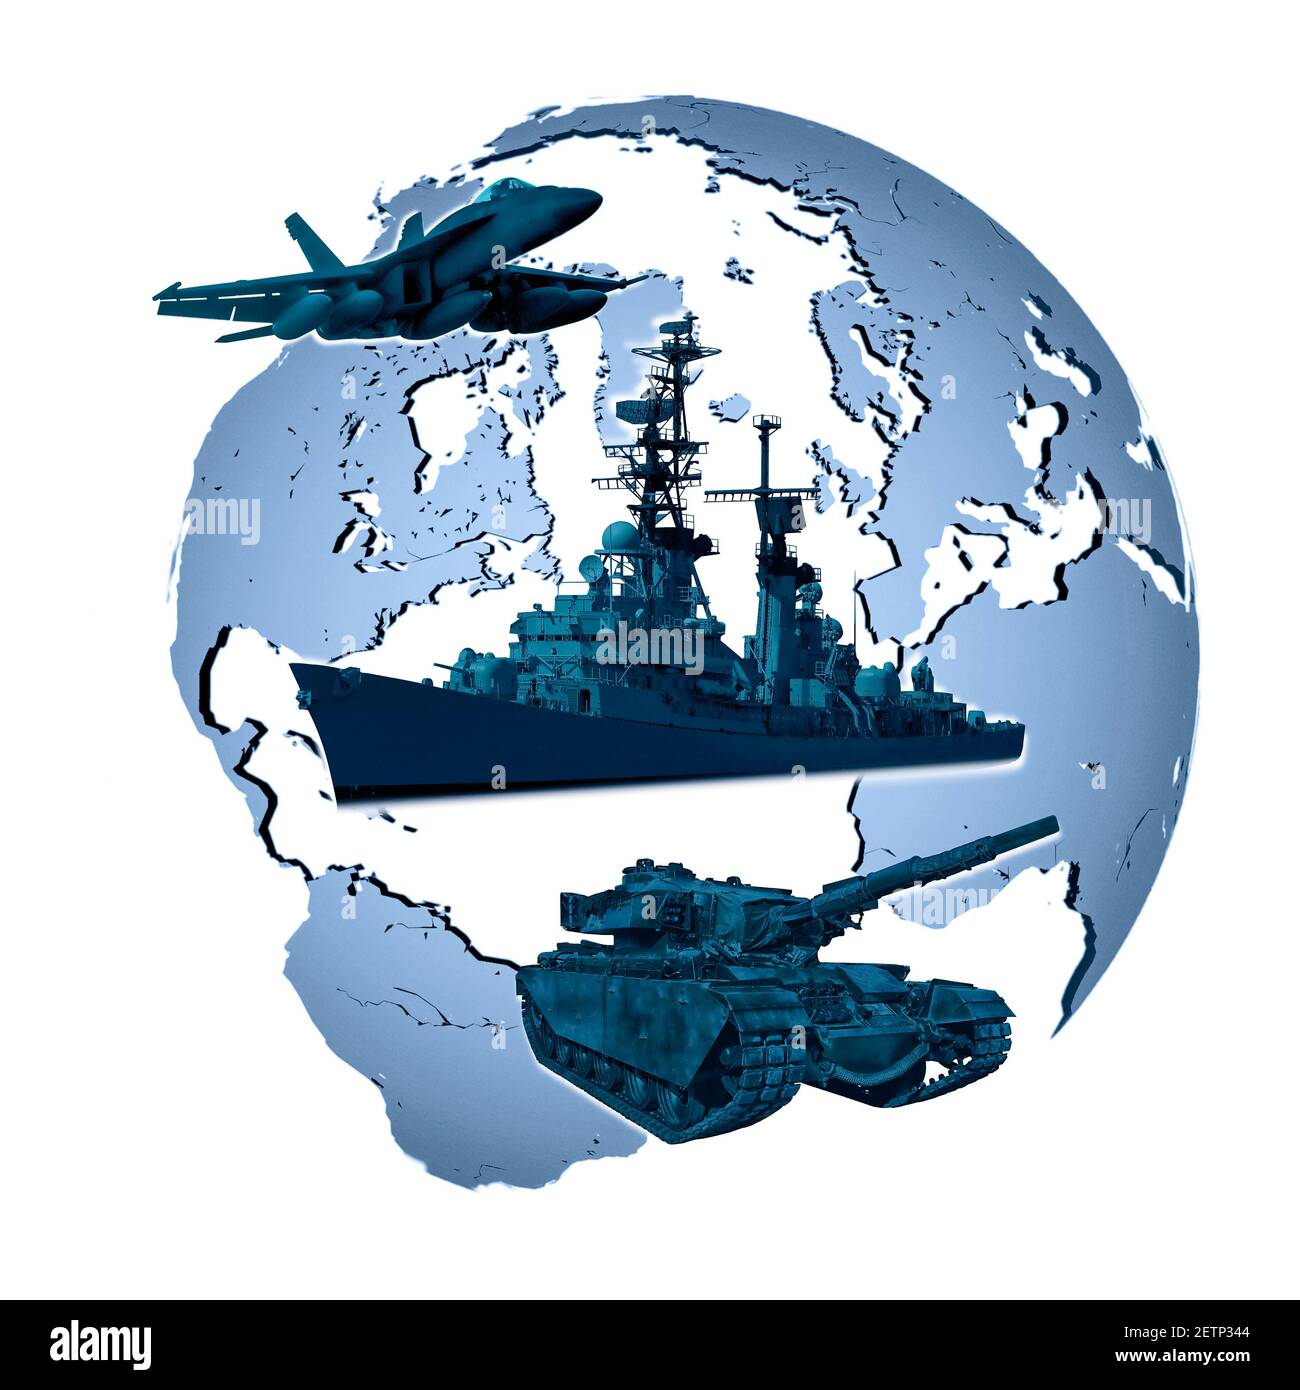 Fighter plane, battleship and tank in front of a globe Stock Photo